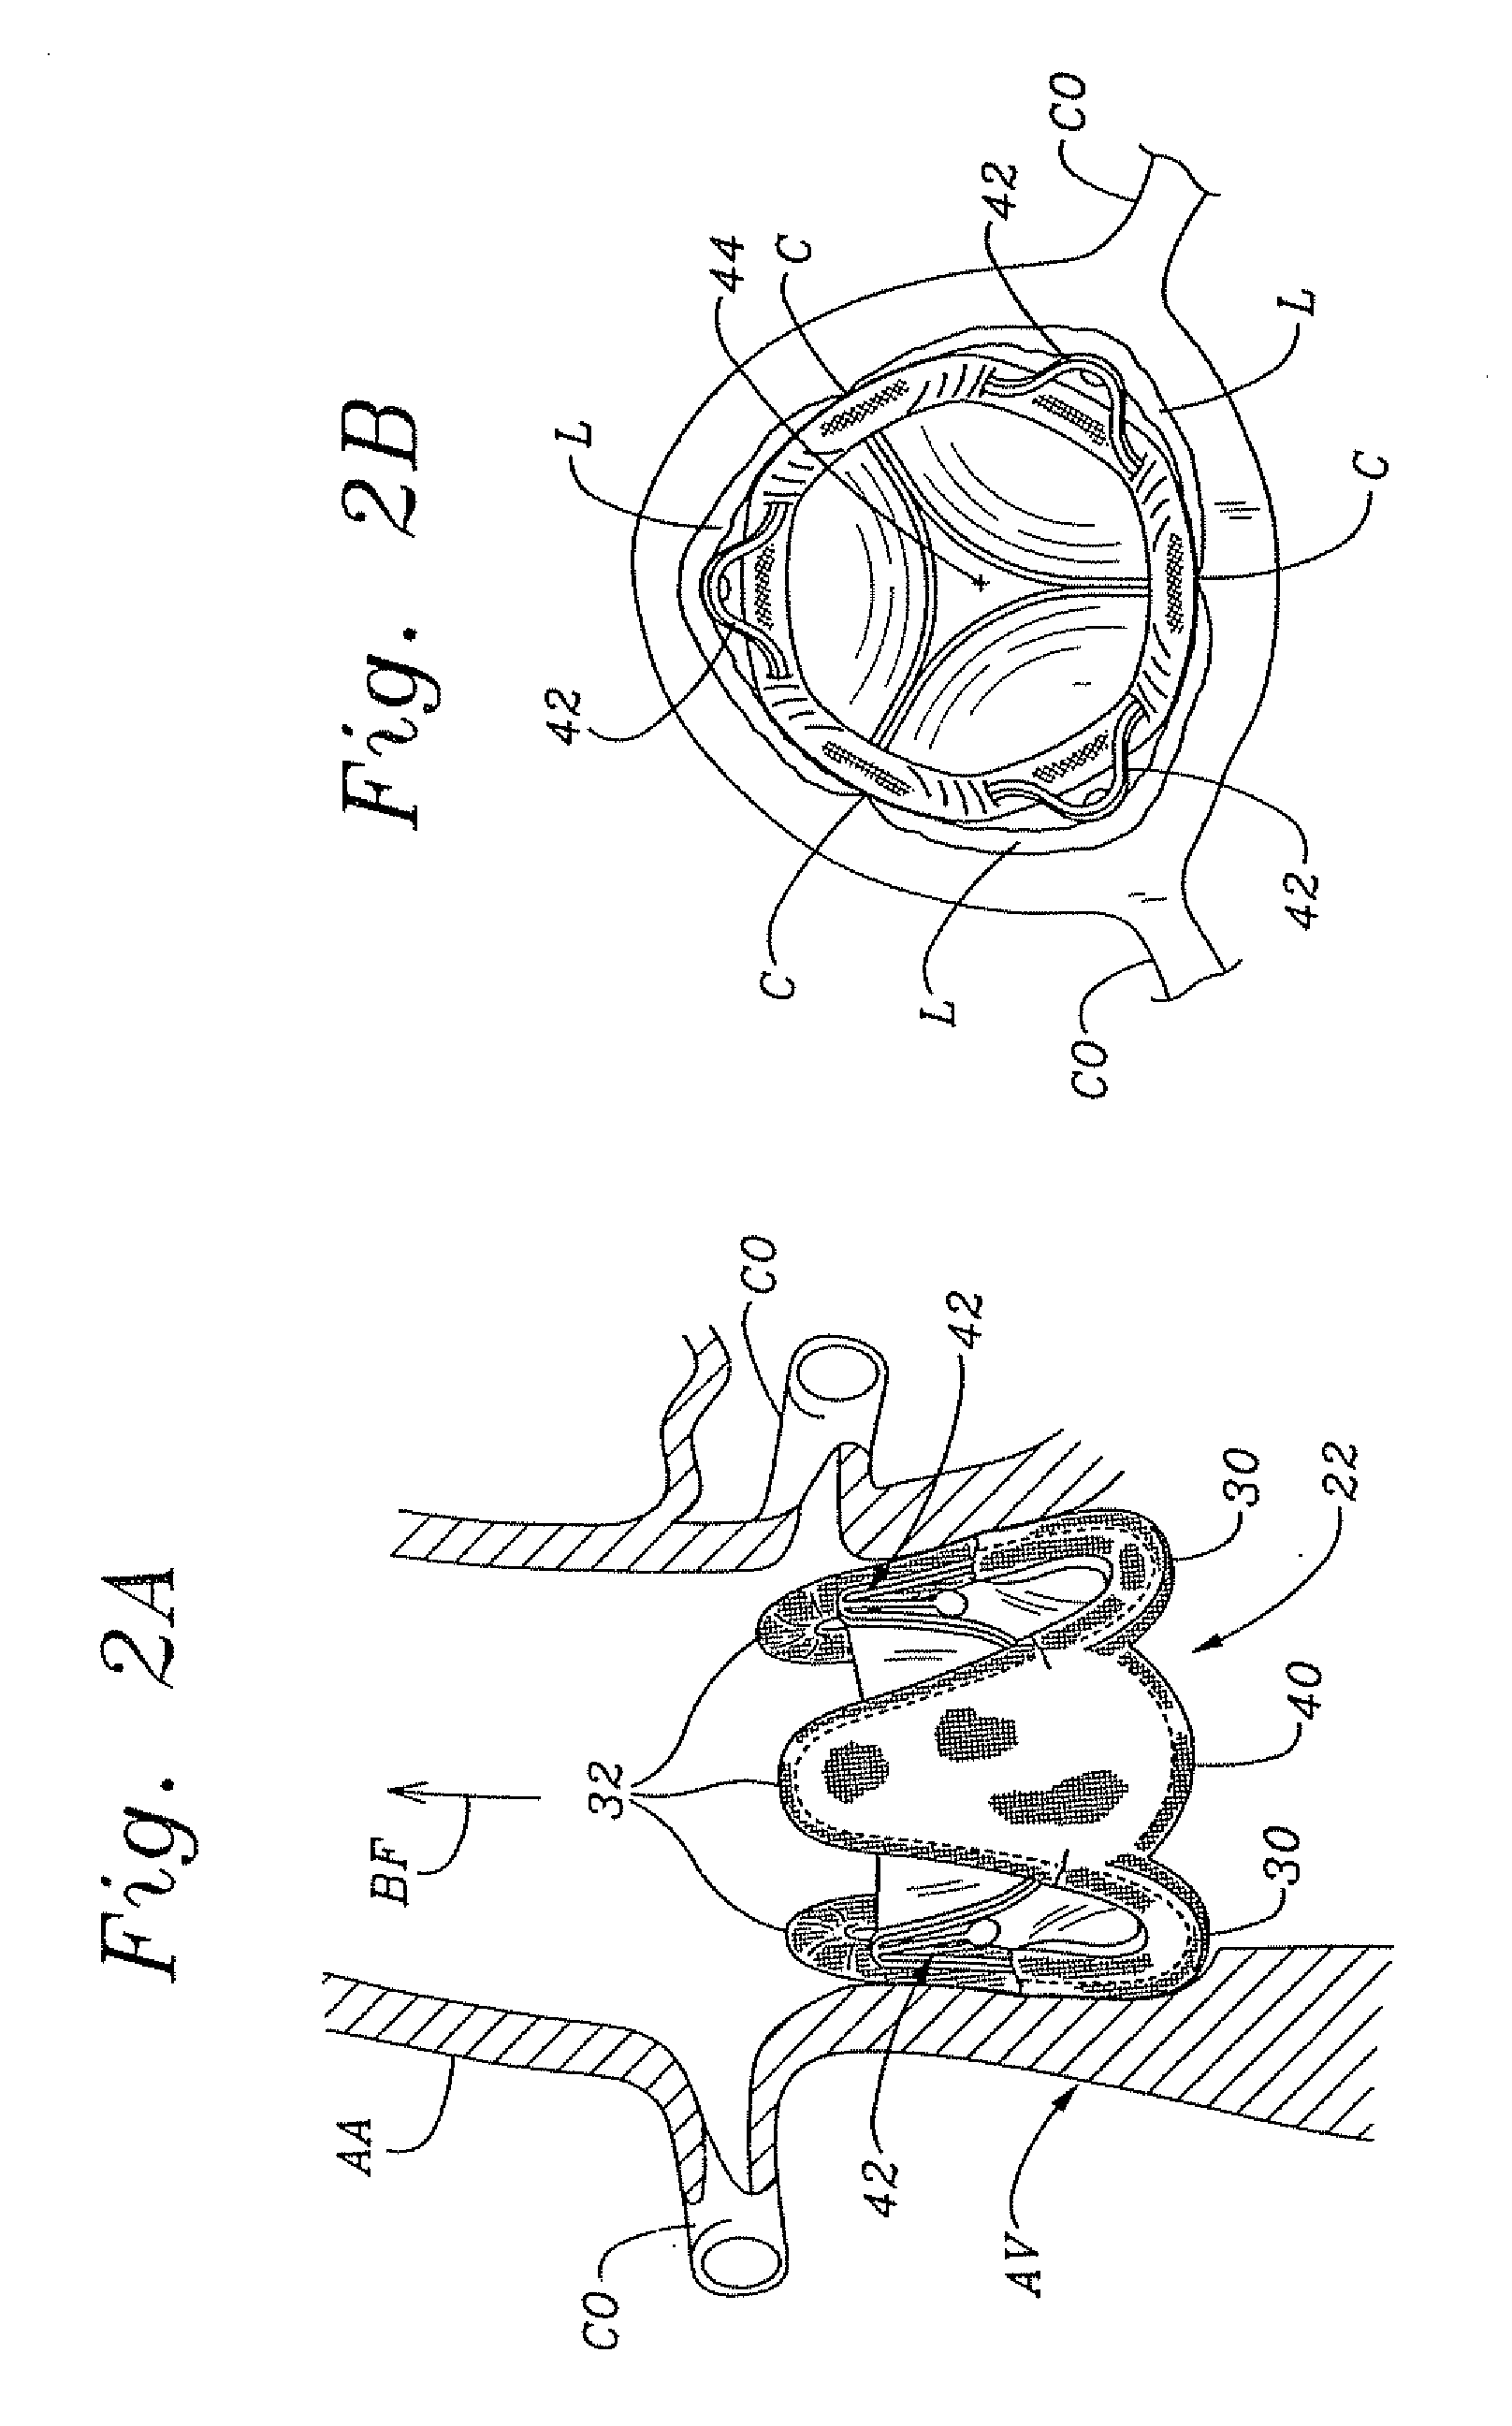 Minimally-invasive heart valve with cusp positioners